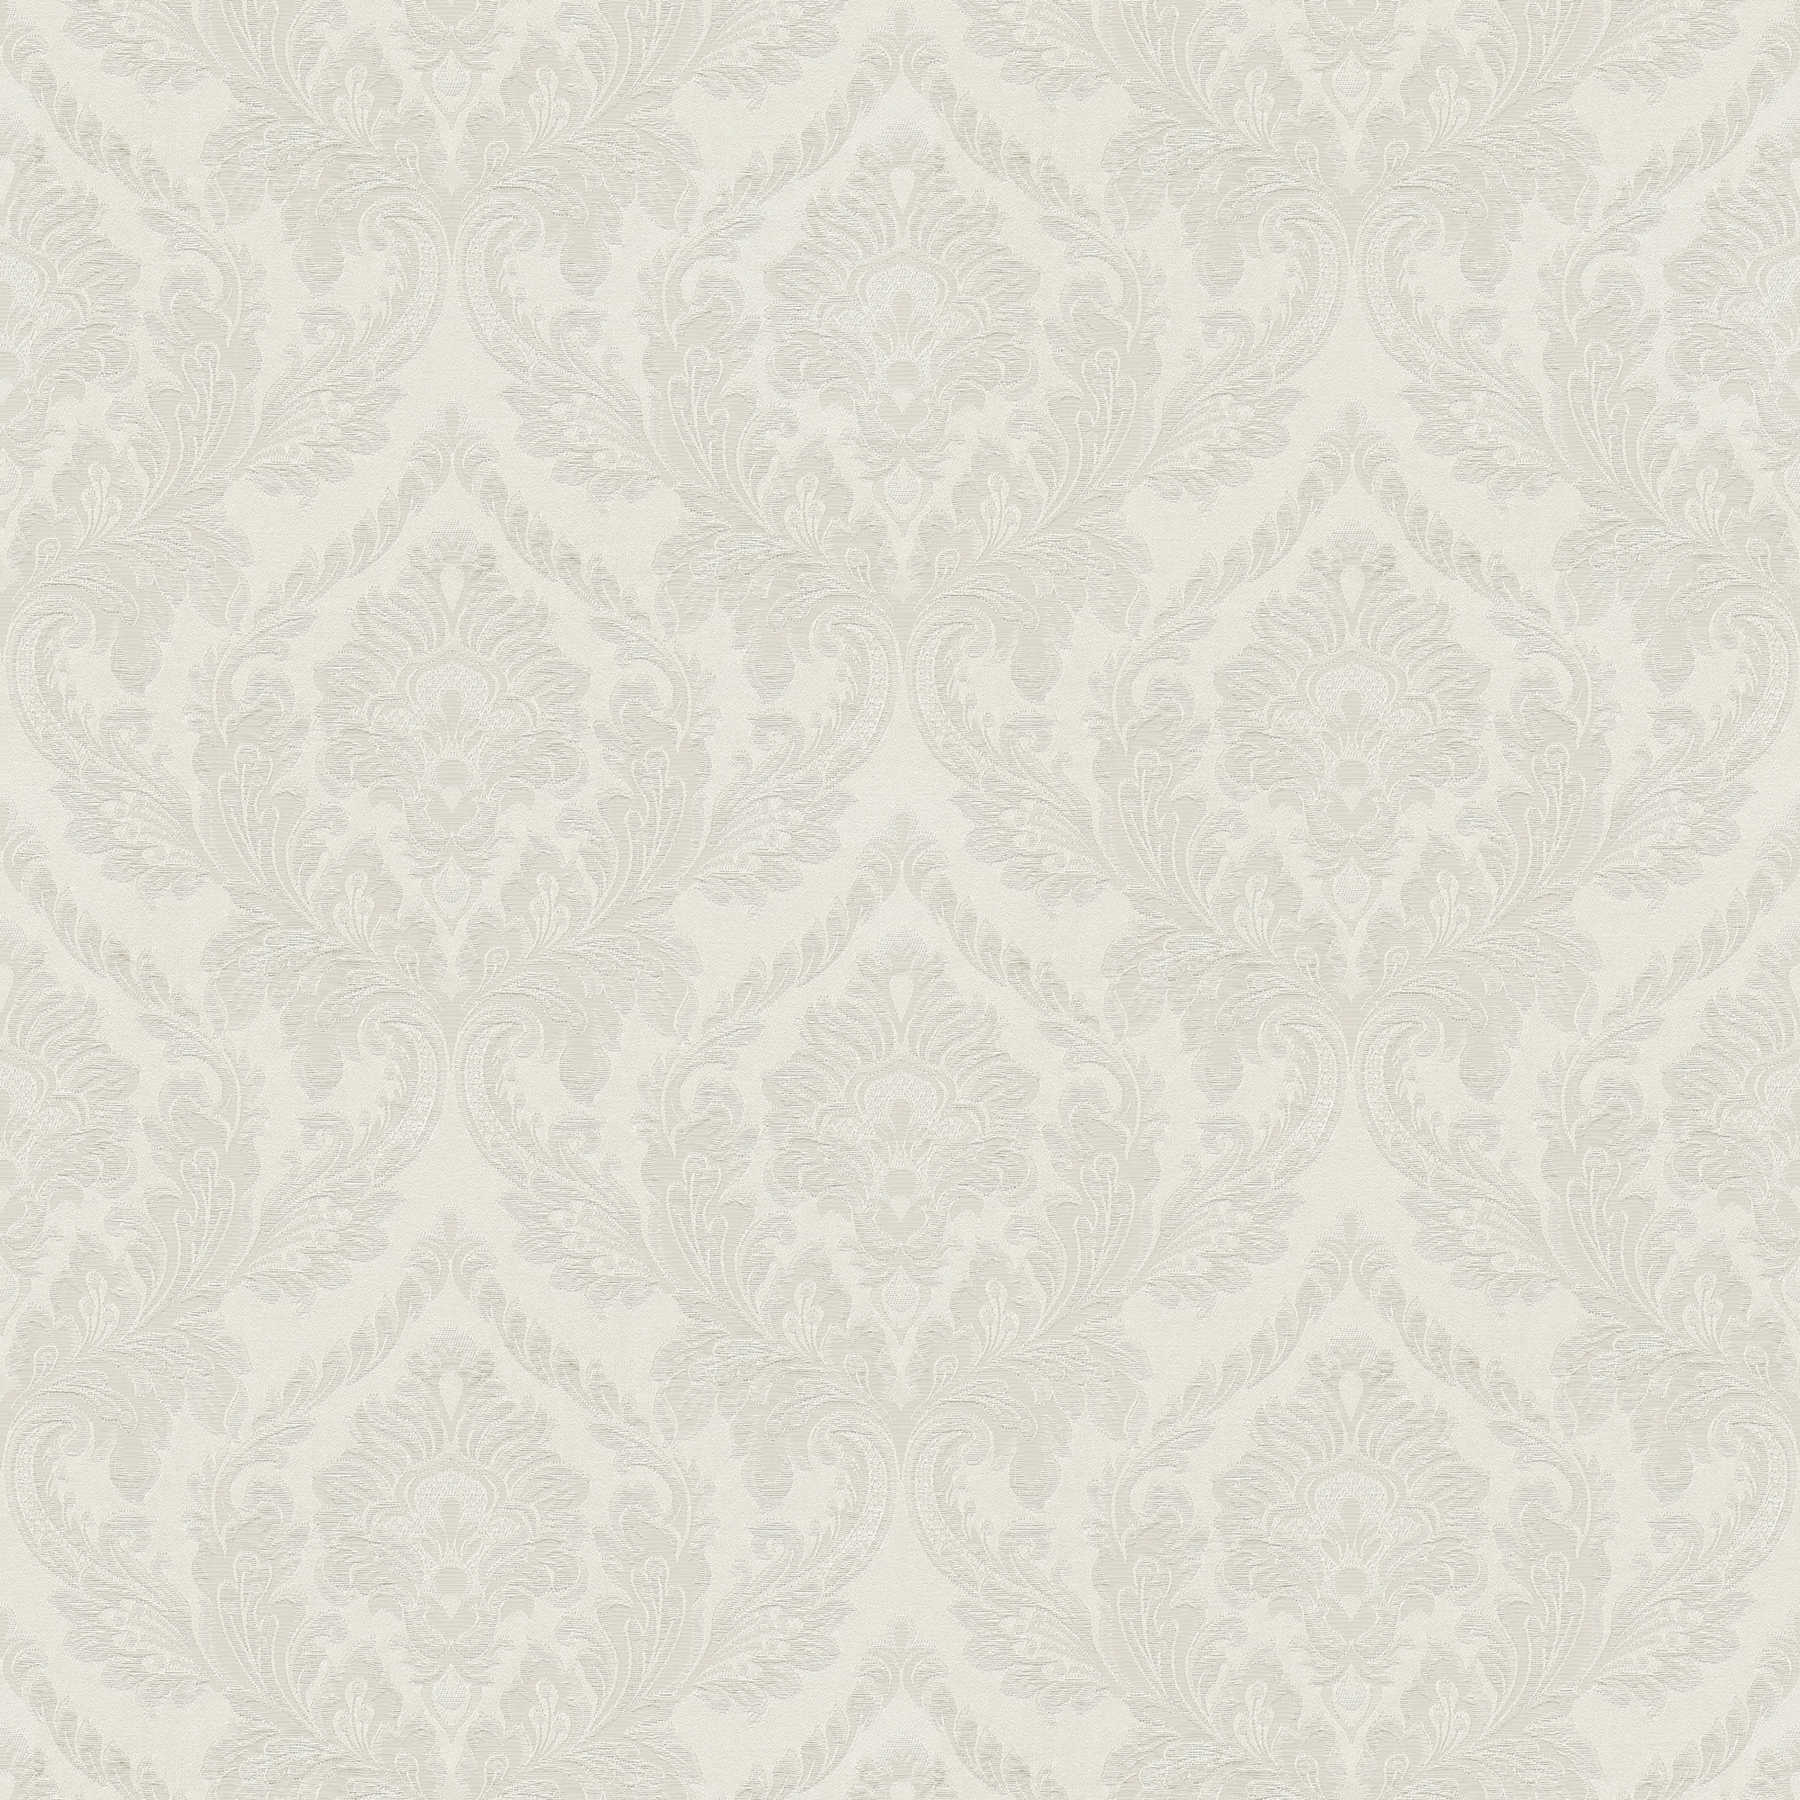 Metallic effect wallpaper with floral ornaments - beige, yellow
